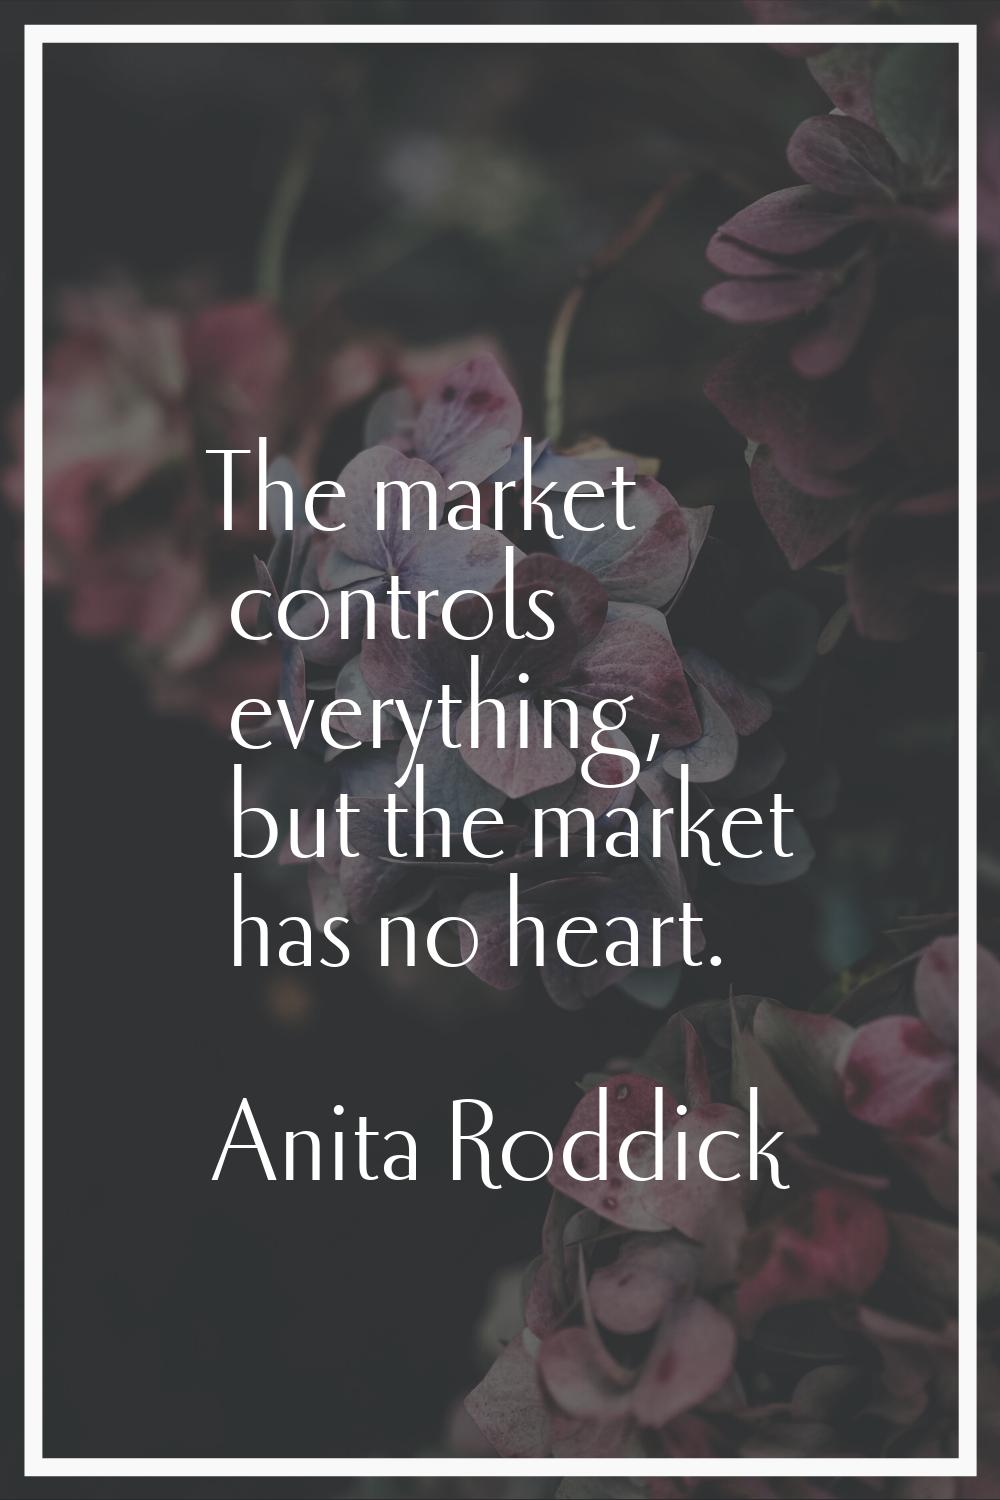 The market controls everything, but the market has no heart.